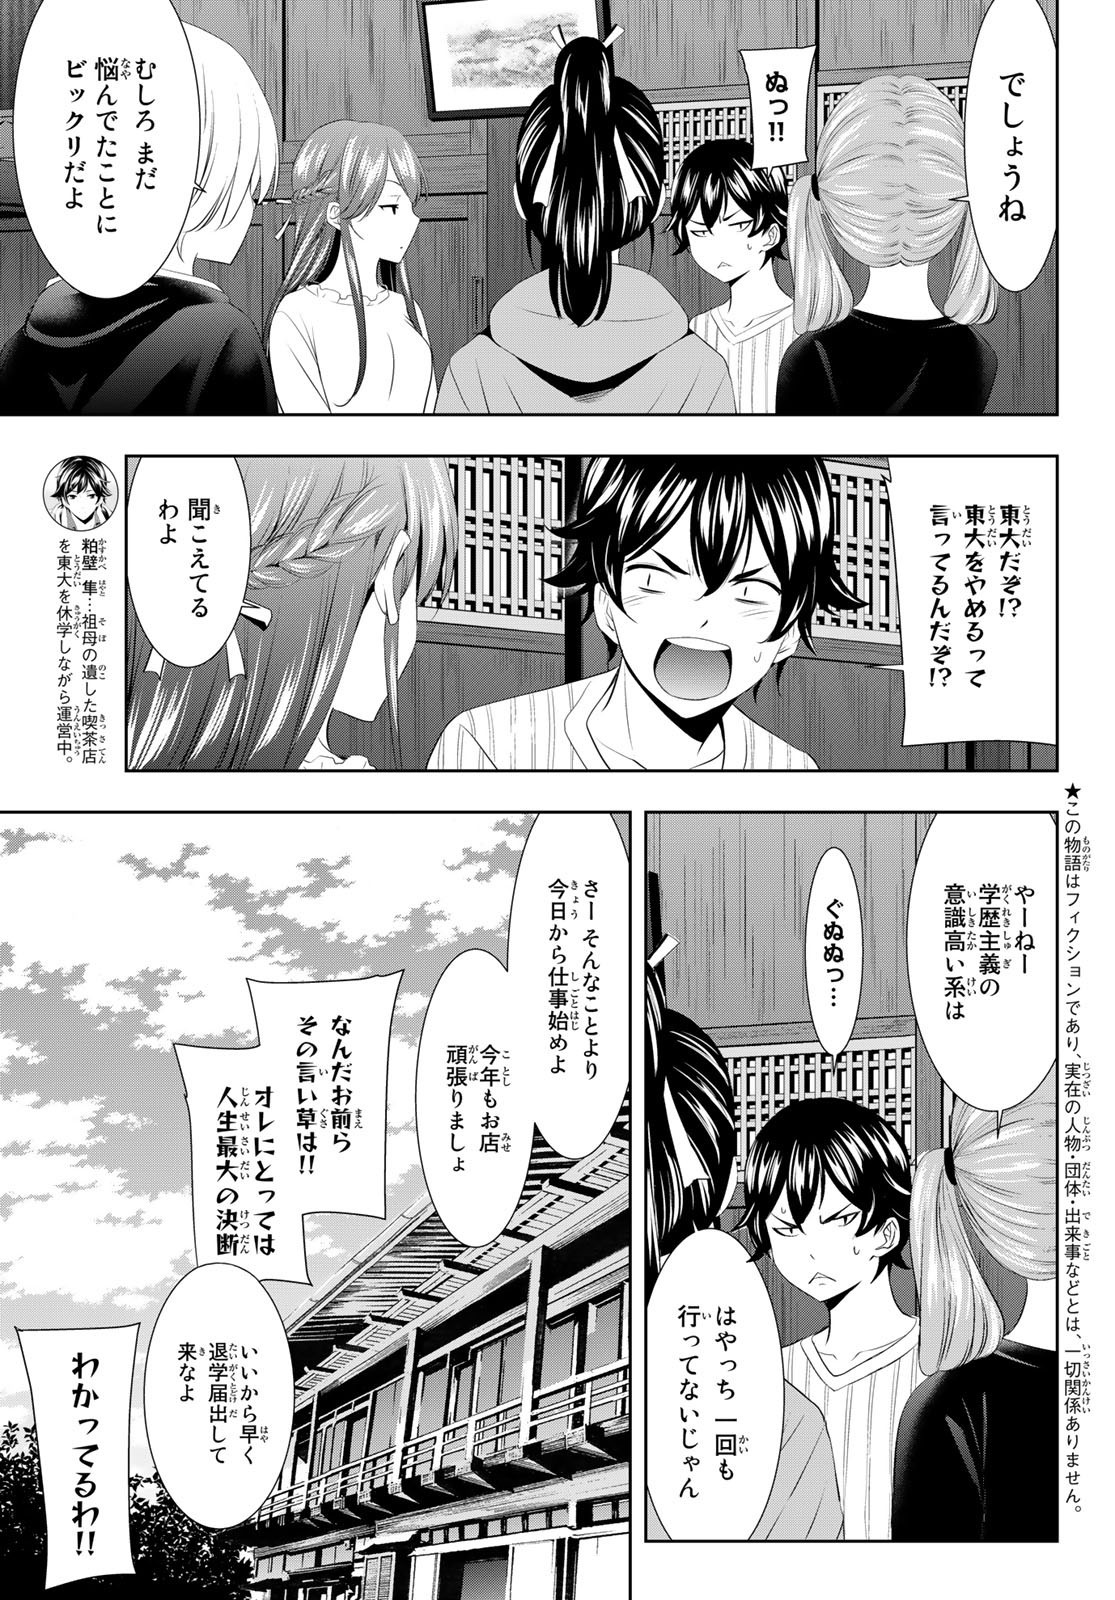 Goddess-Cafe-Terrace - Chapter 087 - Page 3